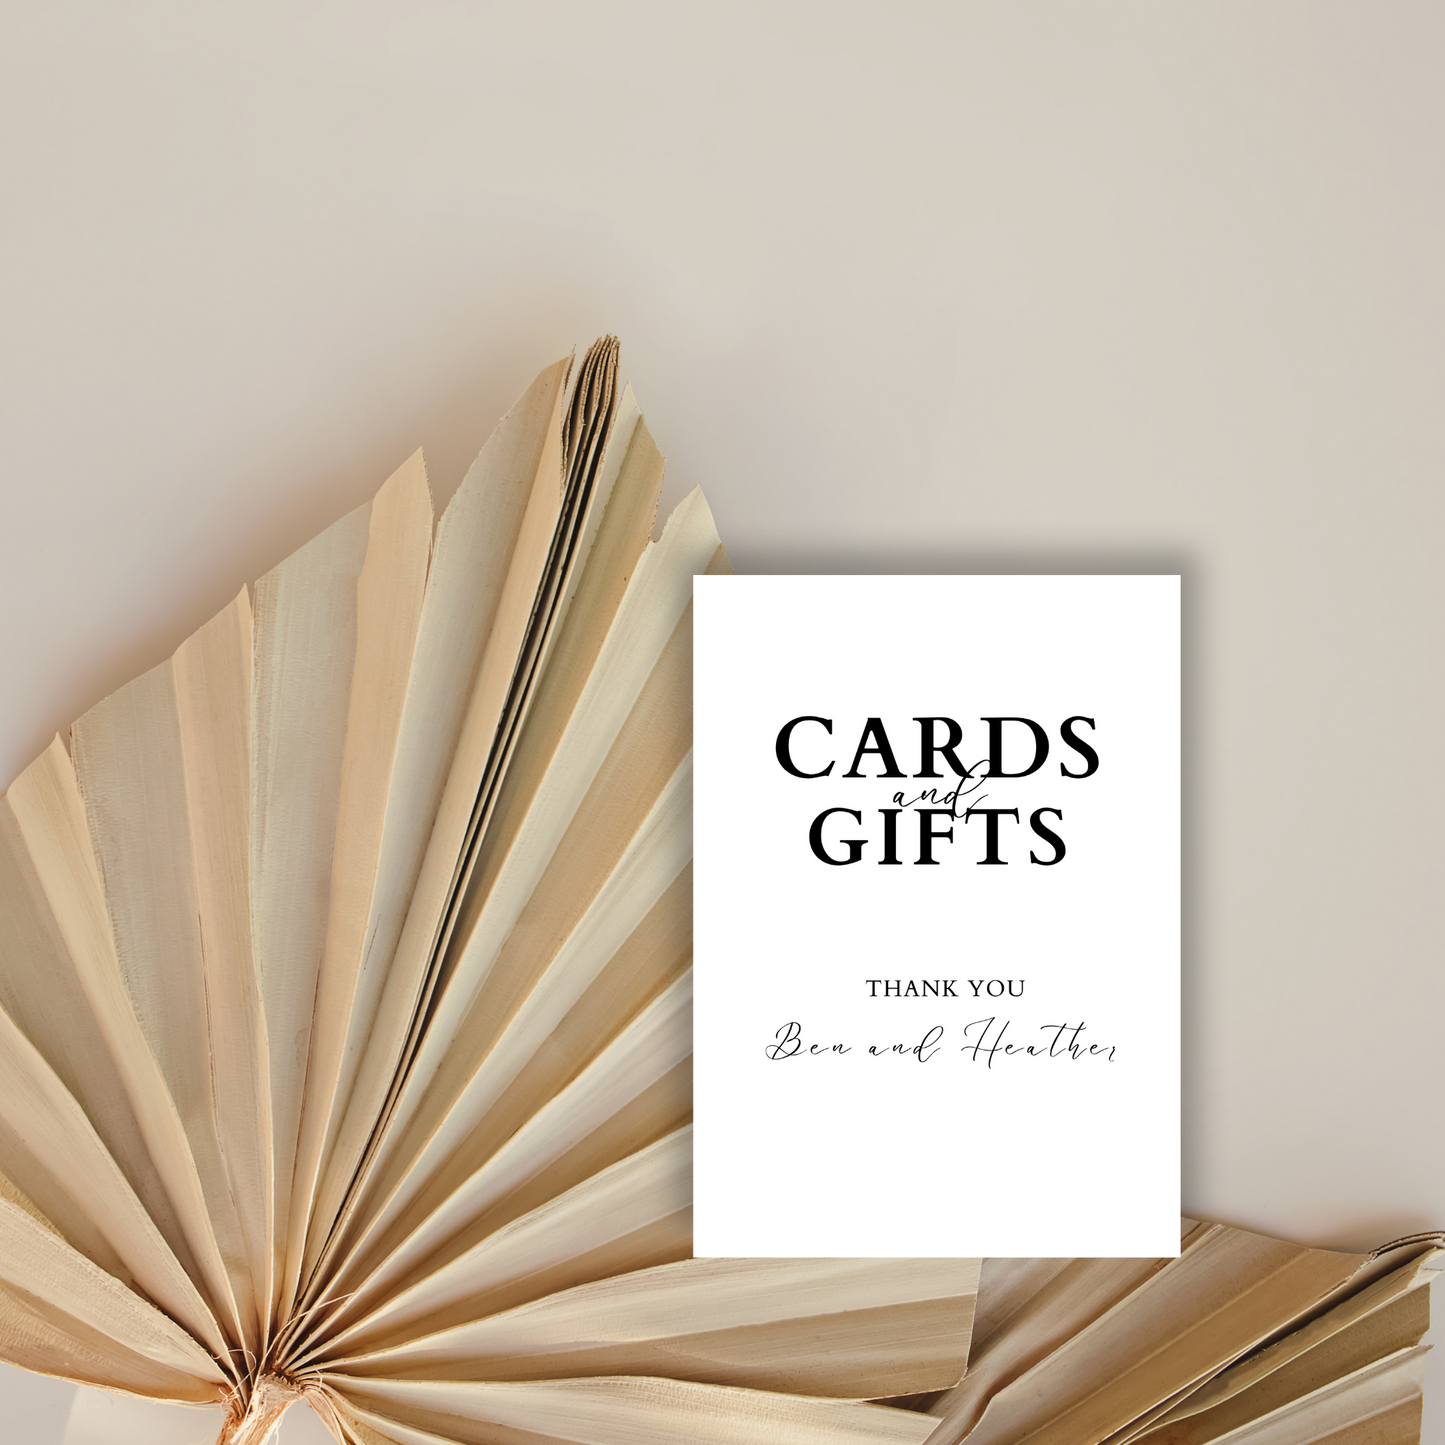 Minimalist Cards and Gifts Sign | Editable Cards and Gifts Wedding Sign | Wedding Sign | Simple Gifts Sign | DIY Canva Template |